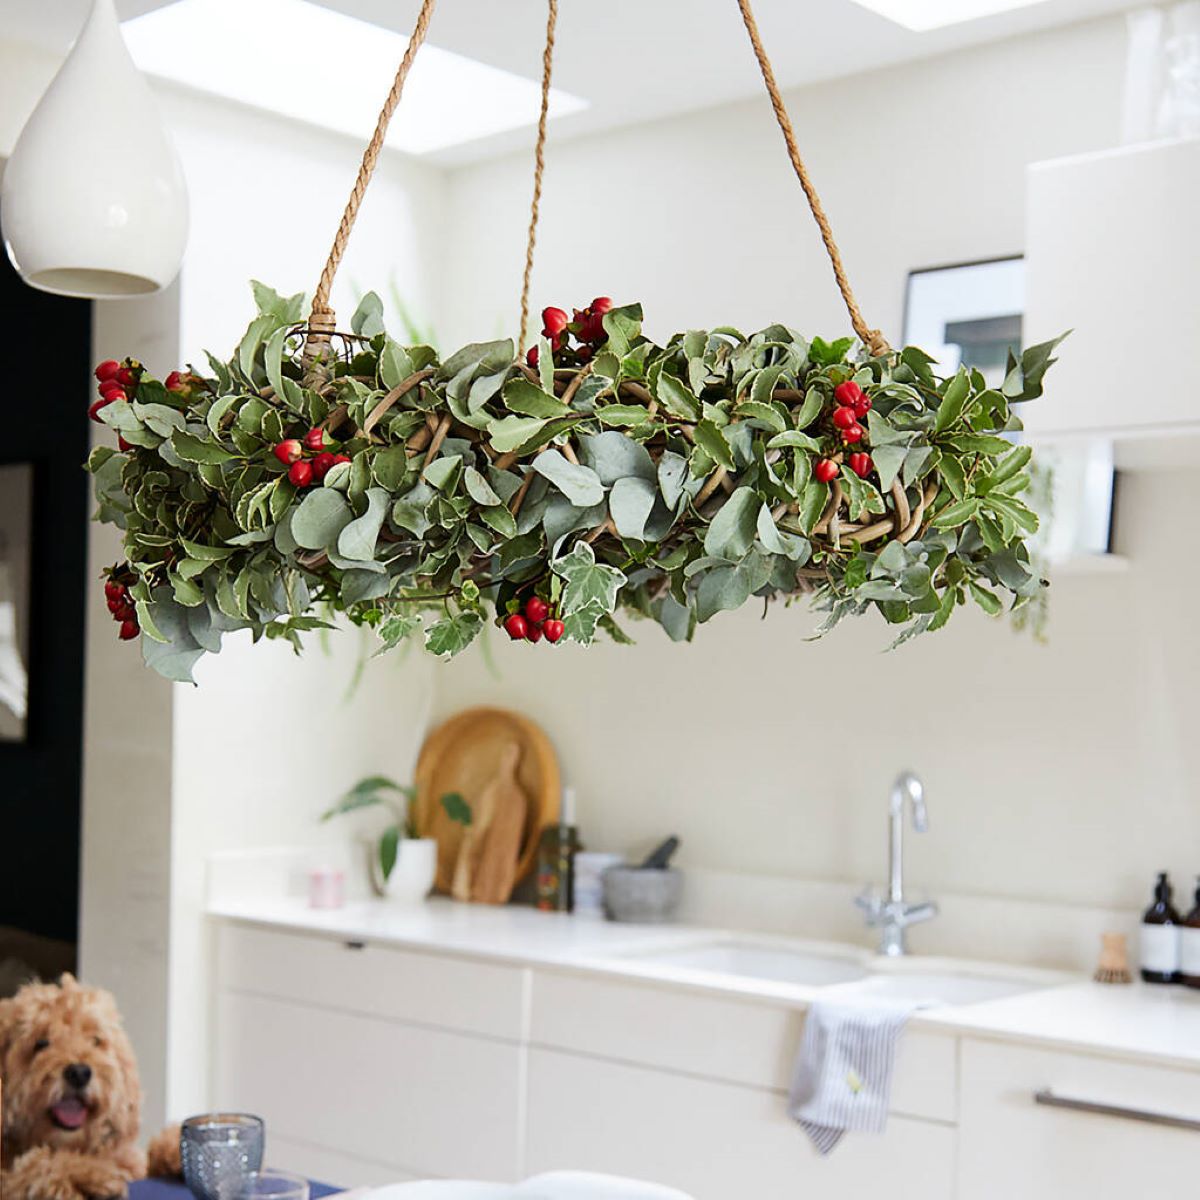 How To Store Wreaths By Hanging